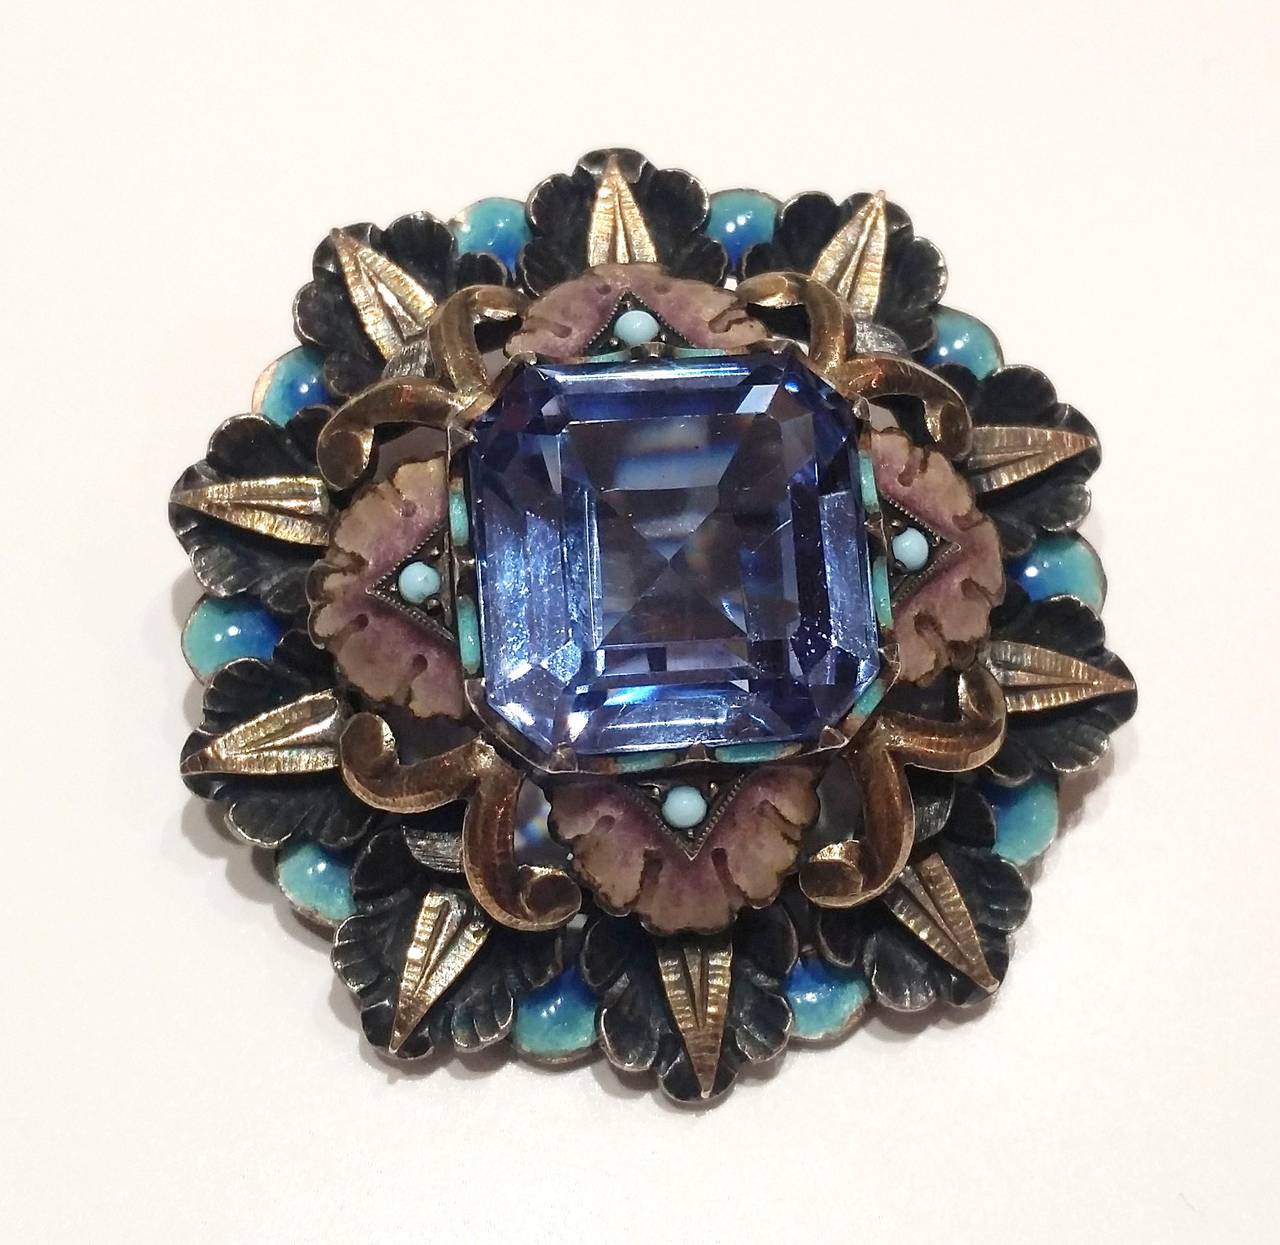 Catalan Art Deco brooch made of silver, silver gilt, enamel and a square cut blue spinel.